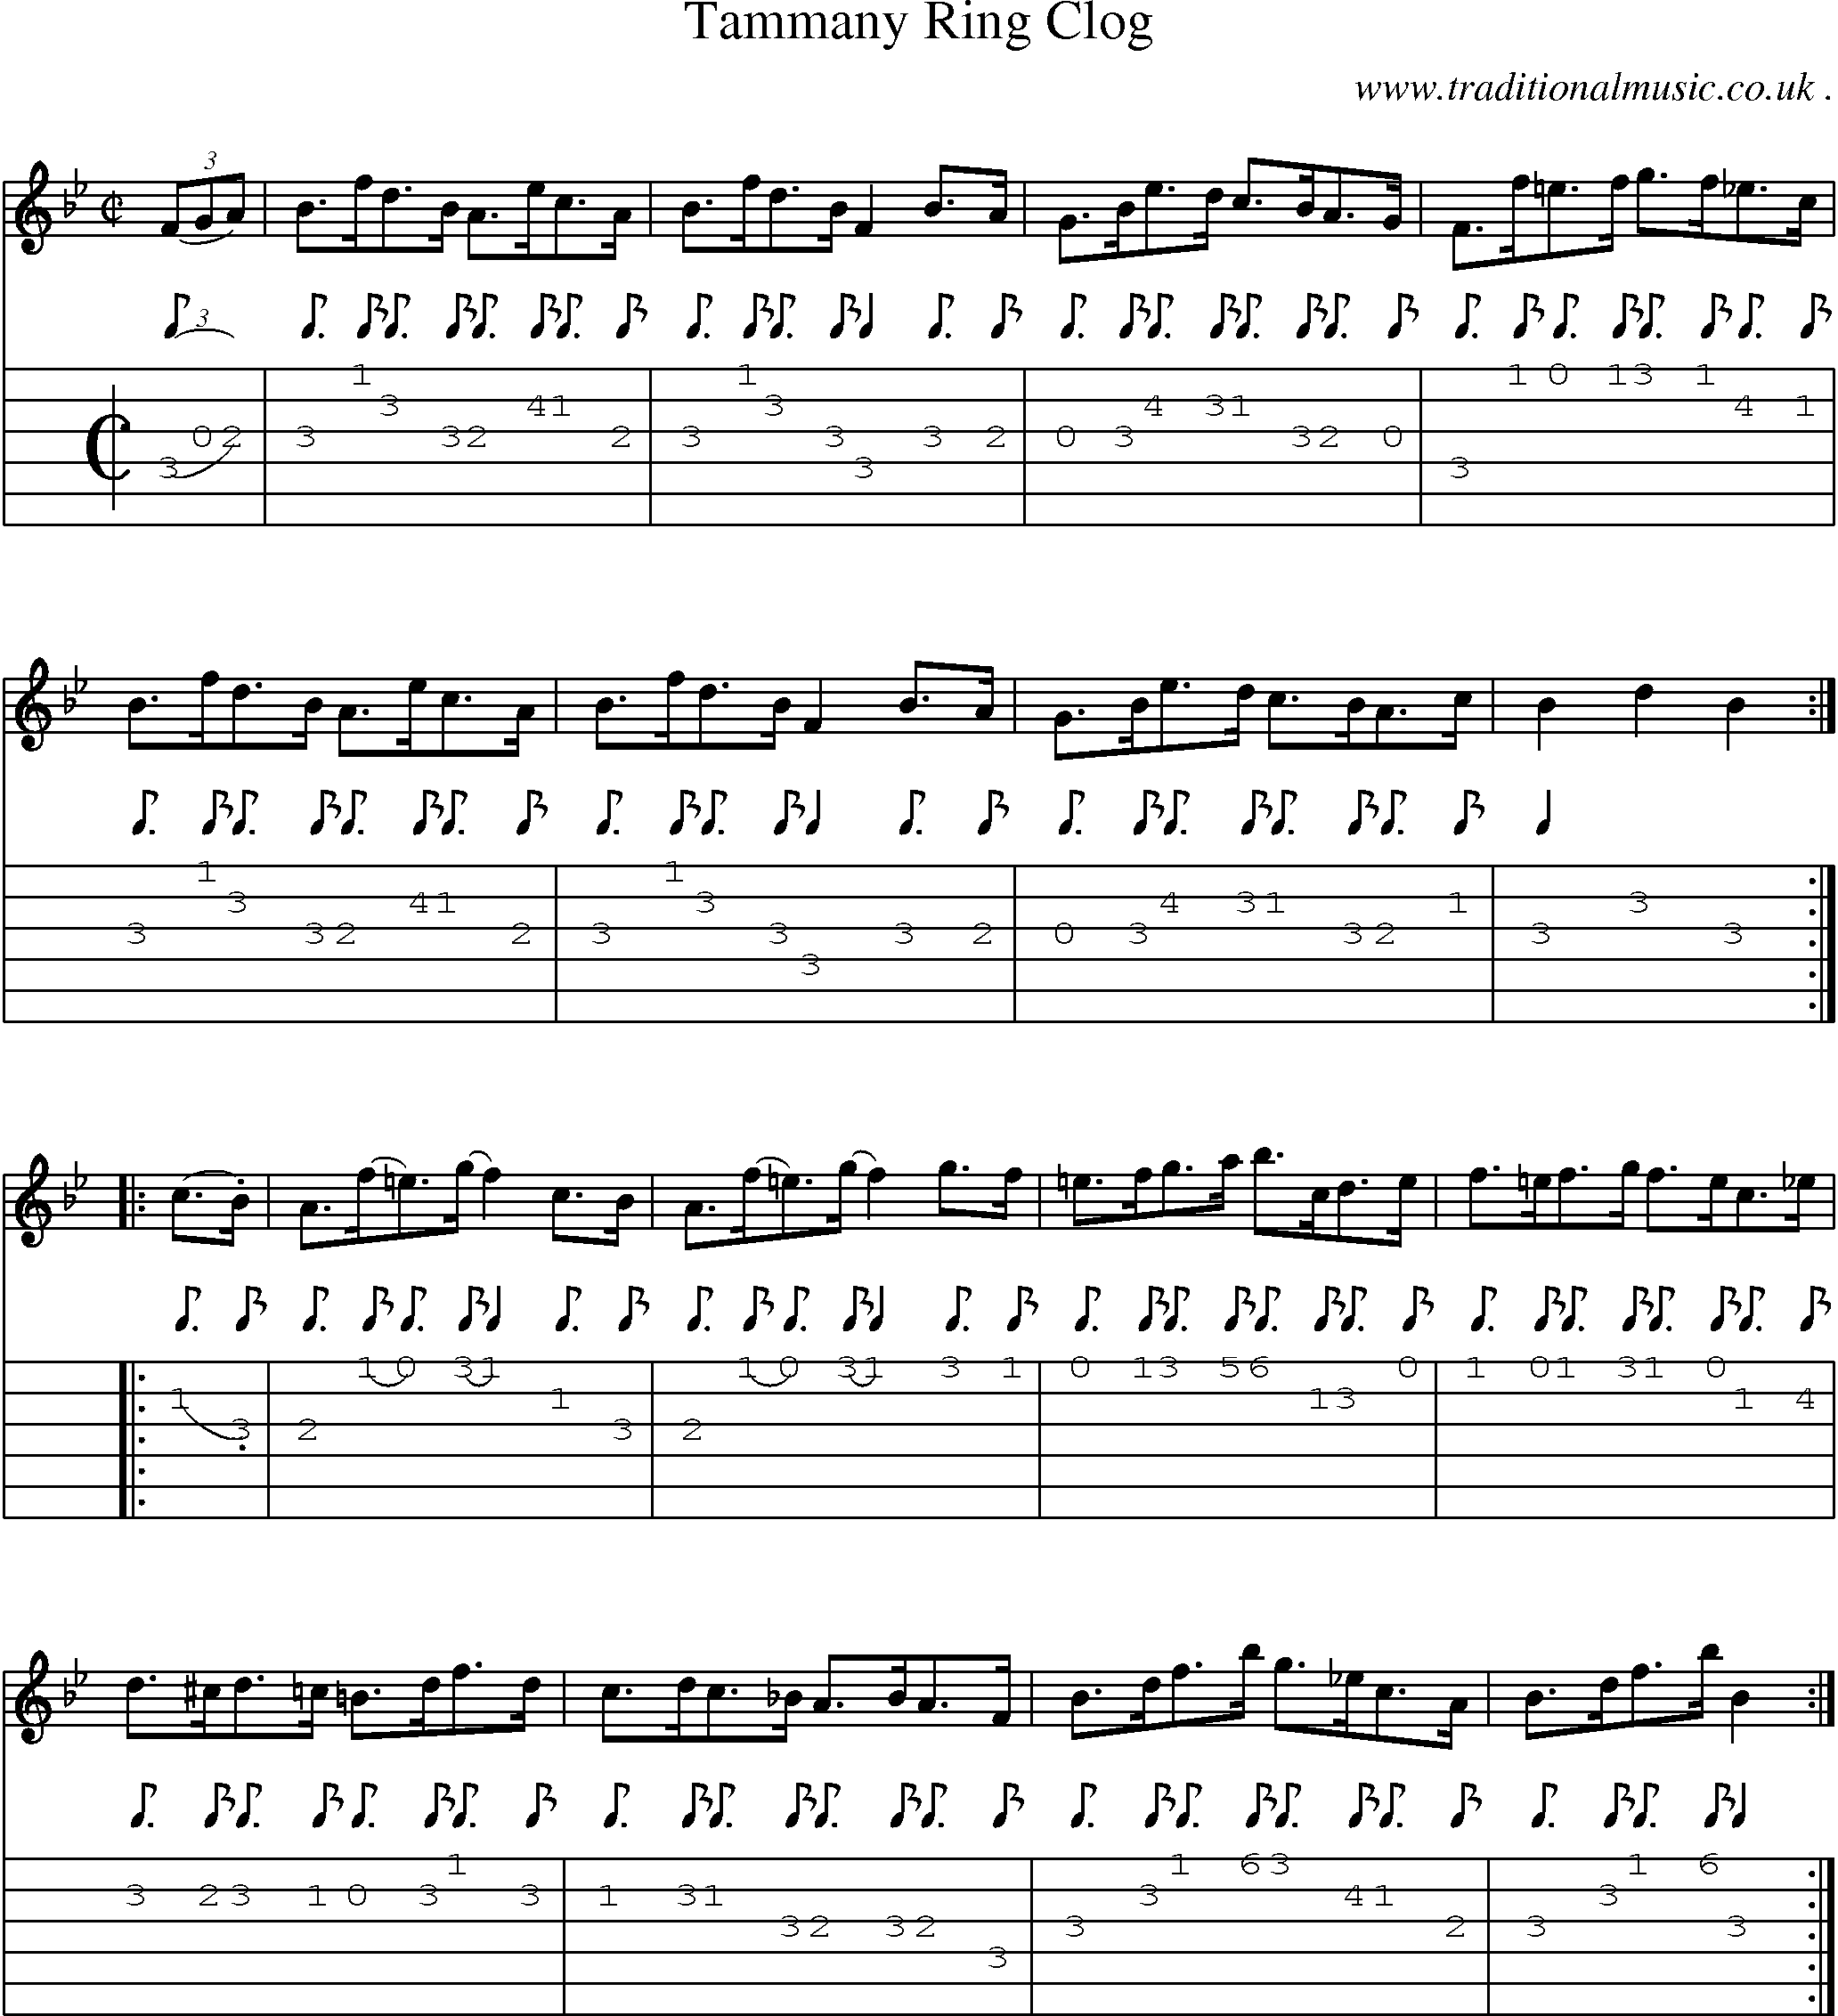 Sheet-Music and Guitar Tabs for Tammany Ring Clog